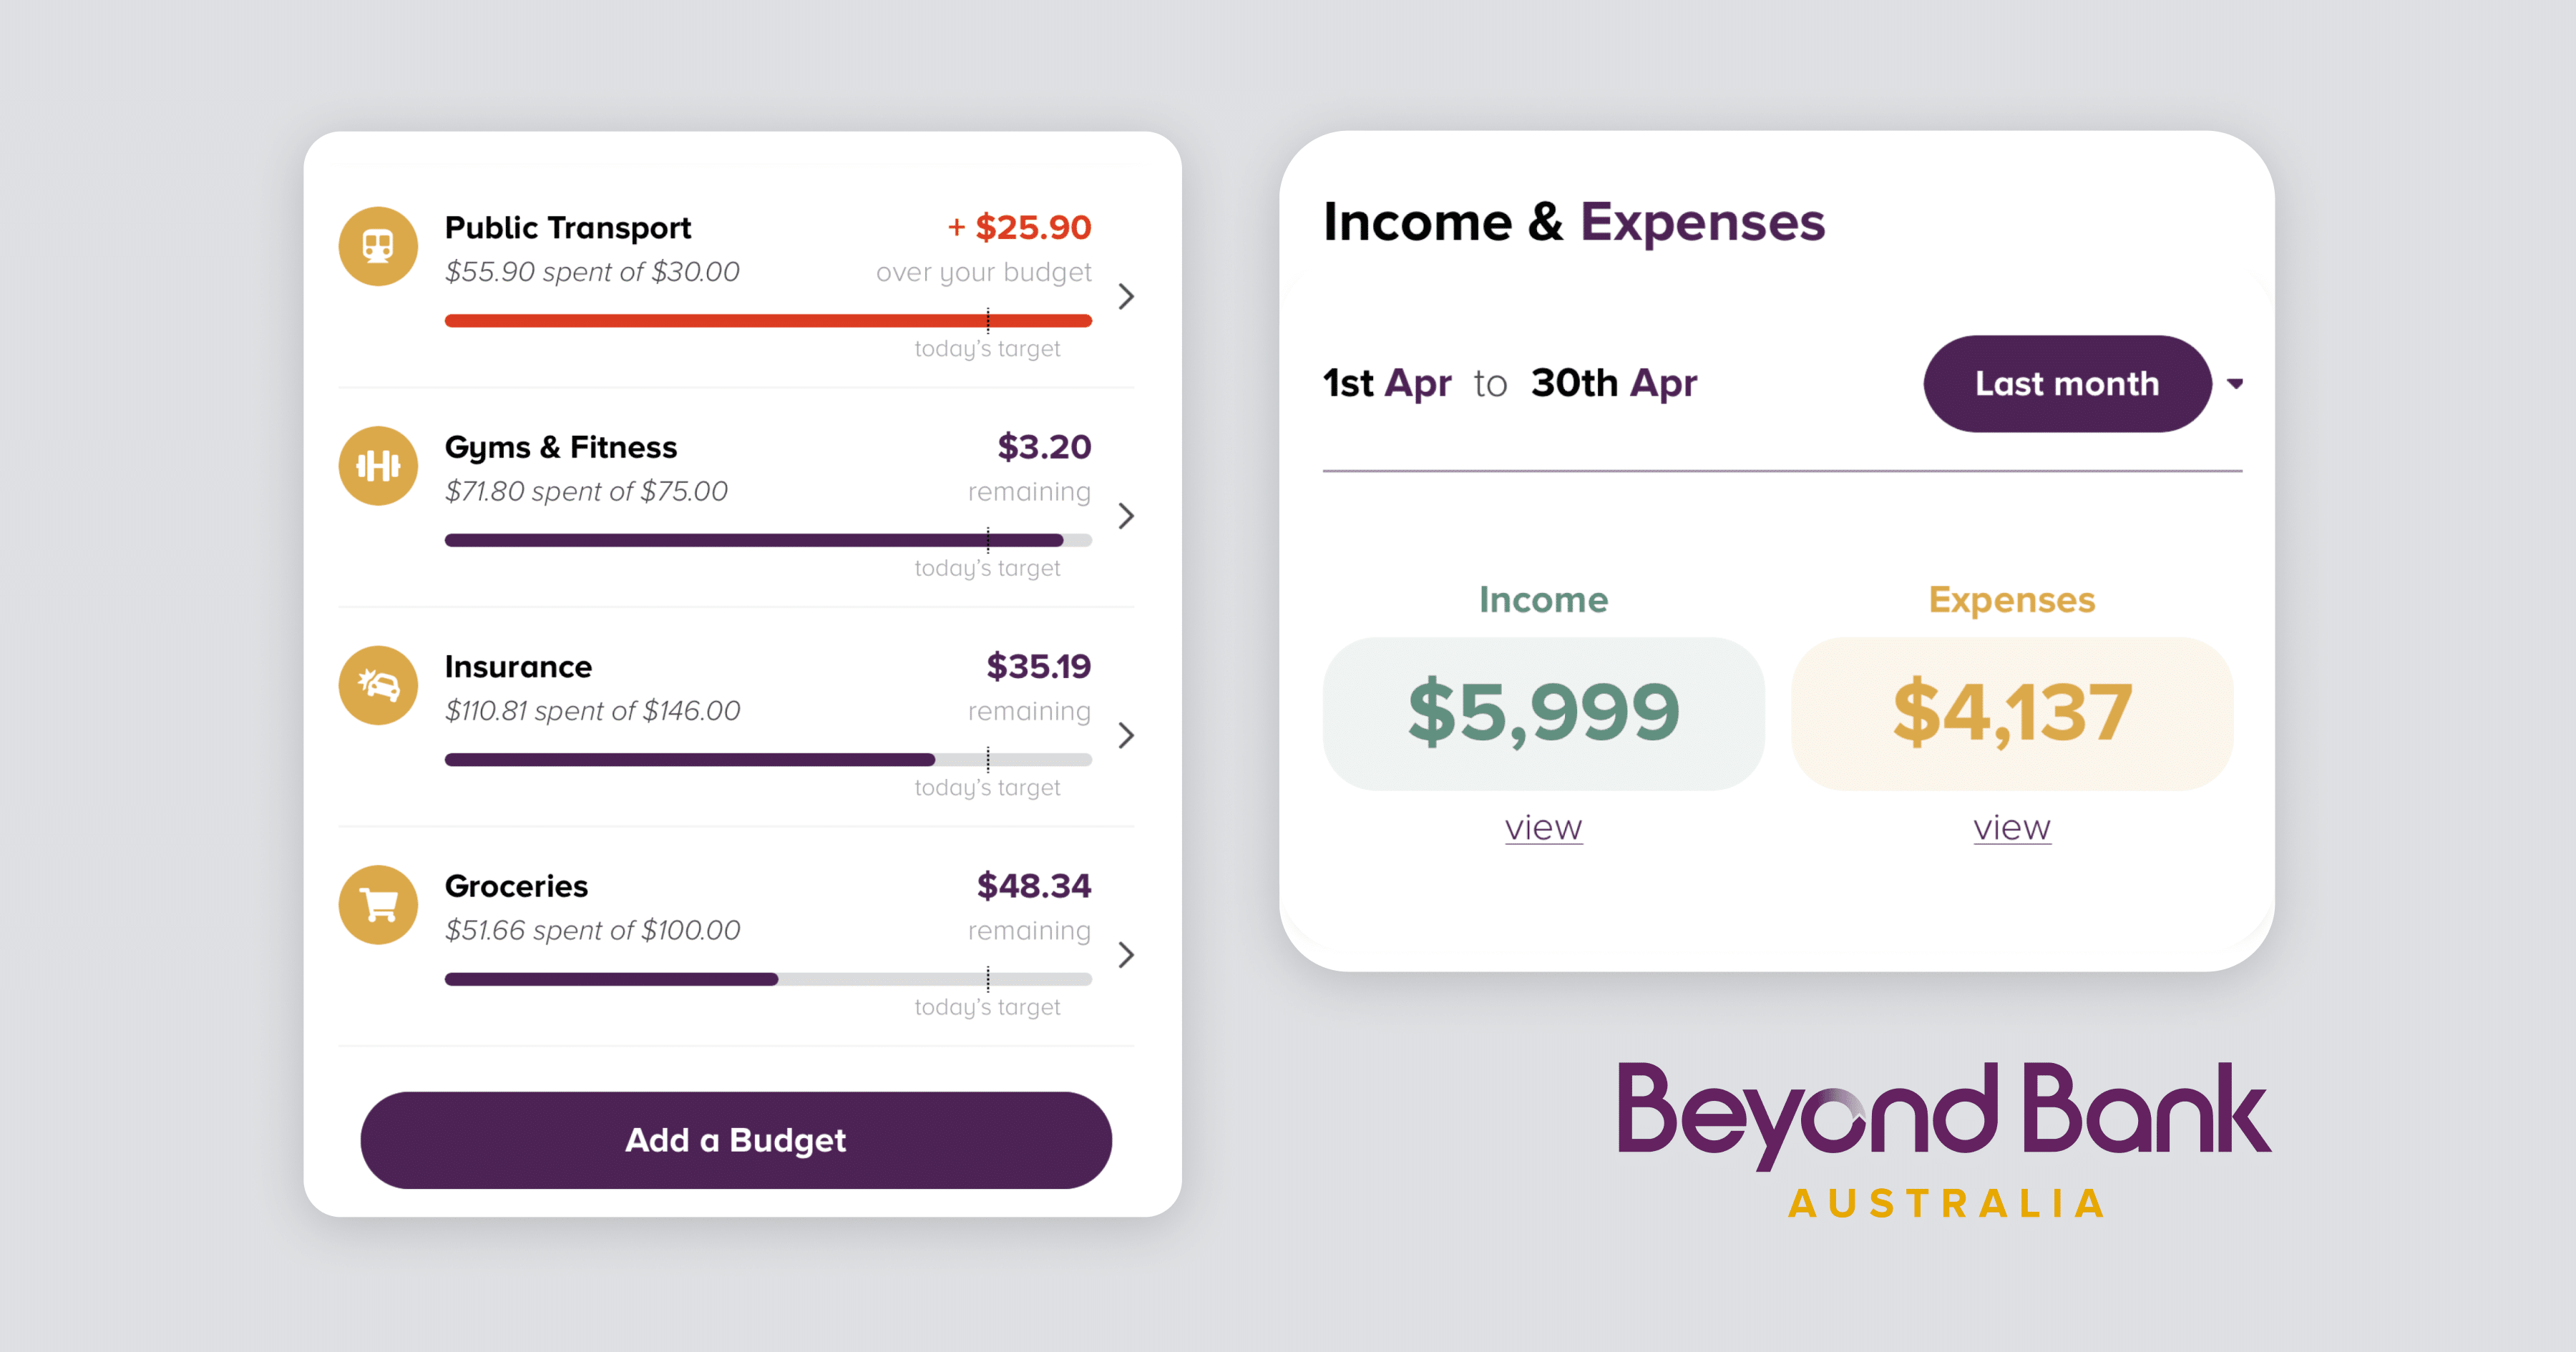 Example of Beyond Bank using Open Banking